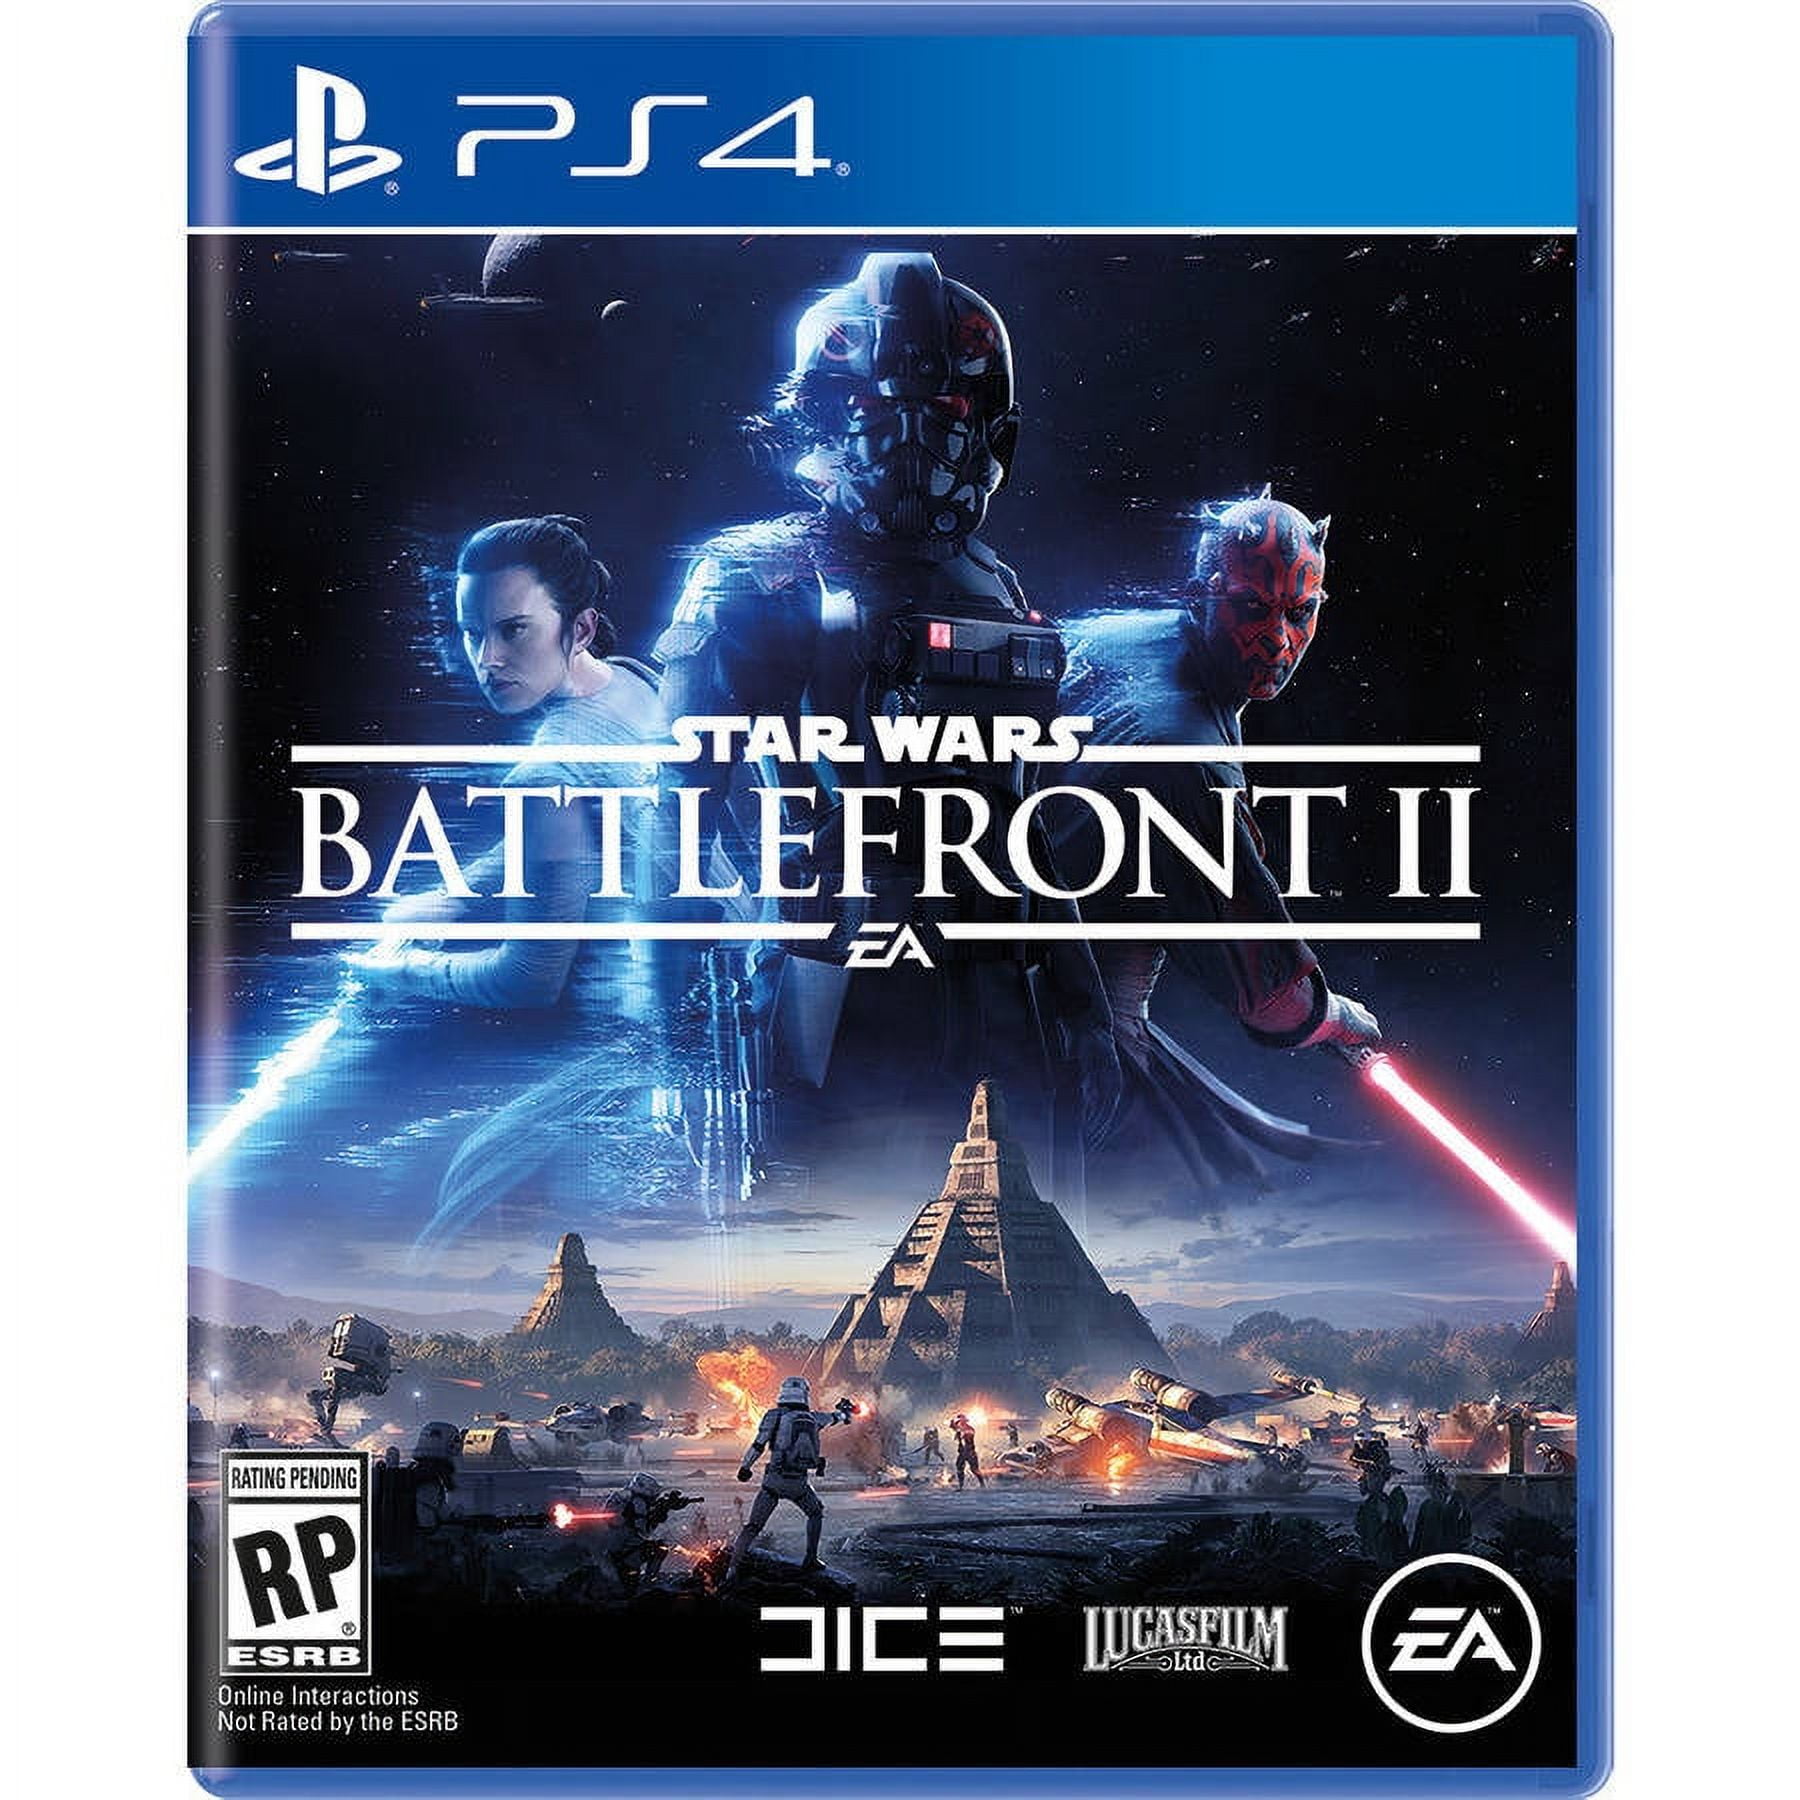 It's Time to Play Star Wars Battlefront II